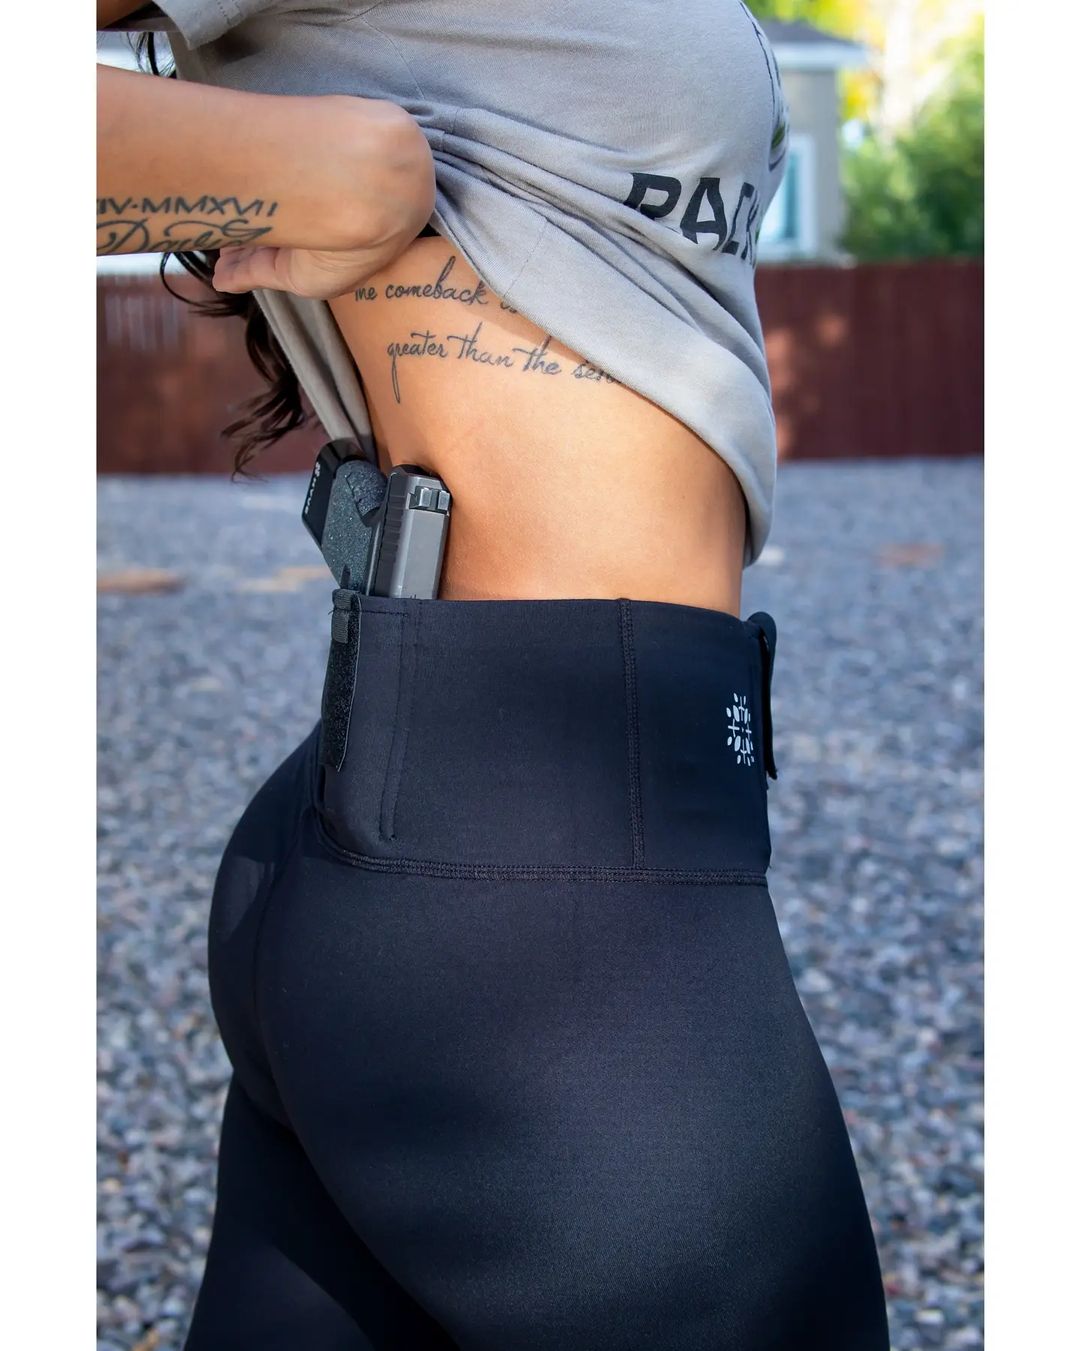 Tactica Defense Fashion on X: Who likes tactical leggings?  @Patriotic_Cassy sure does. Check out your options for Concealed Carry  Leggings from Tactica Defense Fashion #TacticaFashion #2A #GirlsWithGuns # Tactical #TacticalGear #ConcealedCarry